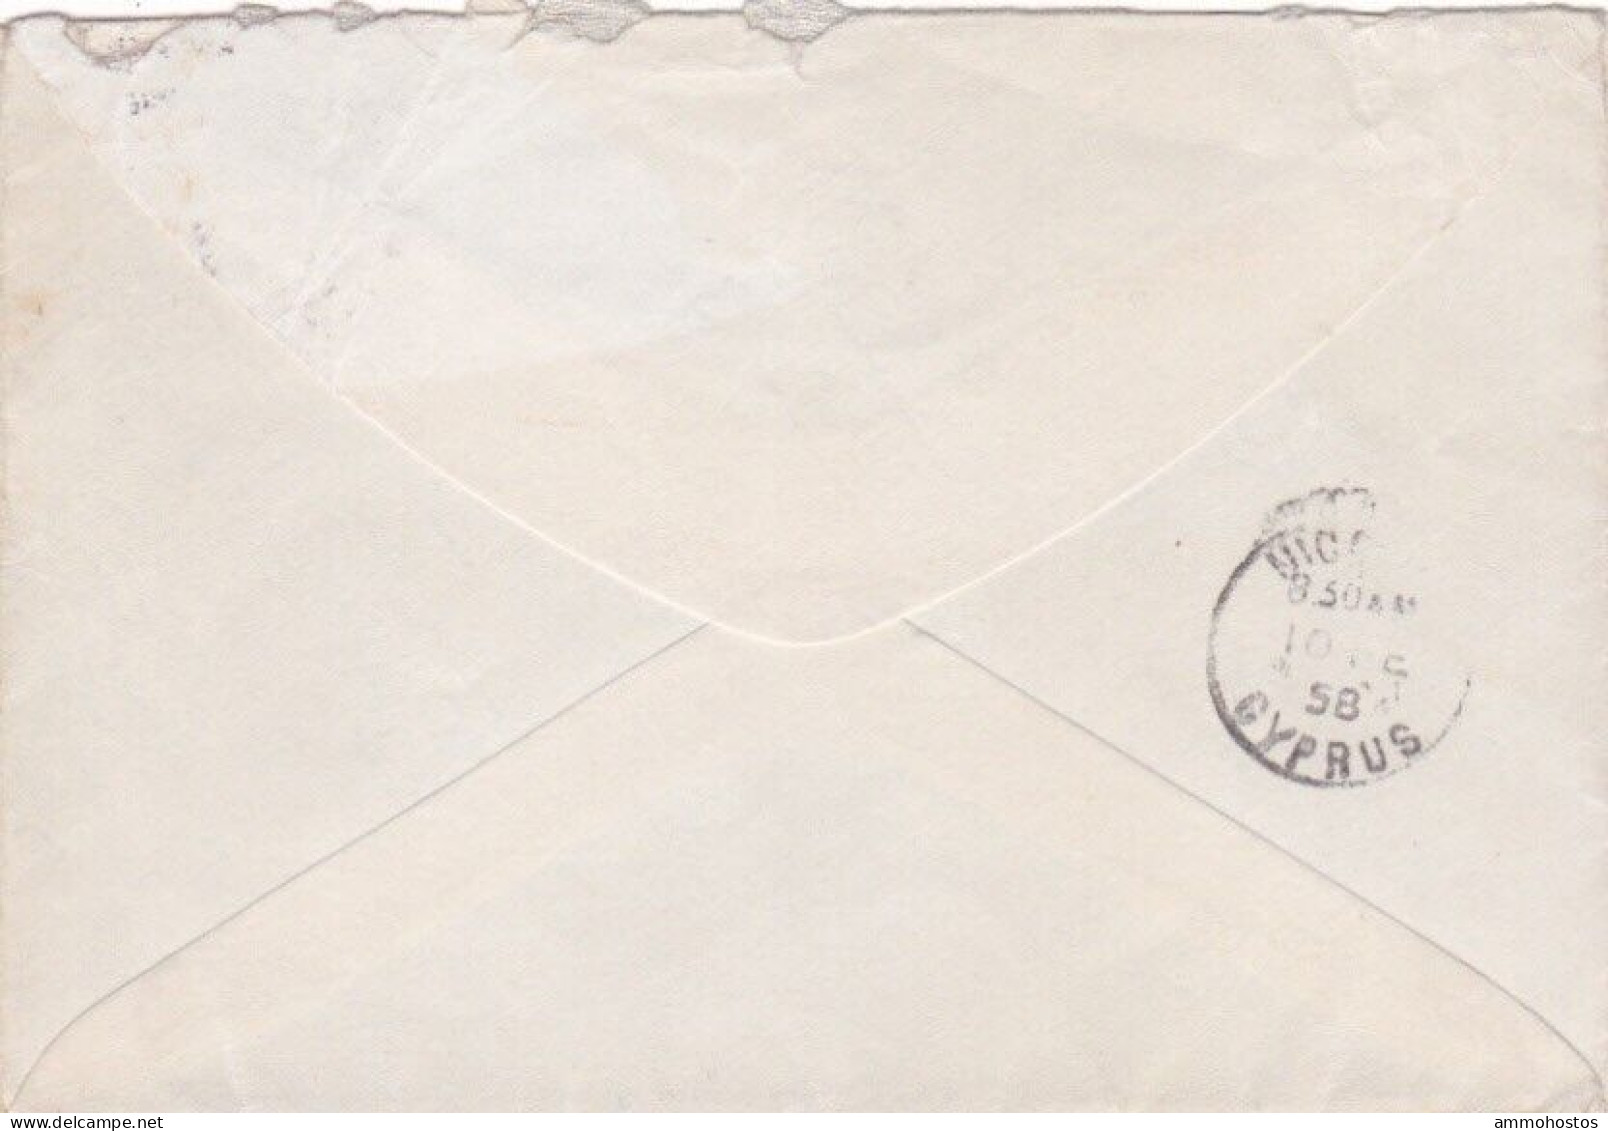 CYPRUS 1958 QEII COVER FIELD POST OFFICE FPO 113 TO NICOSIA 10 MILS LOCAL RATE - Chypre (...-1960)